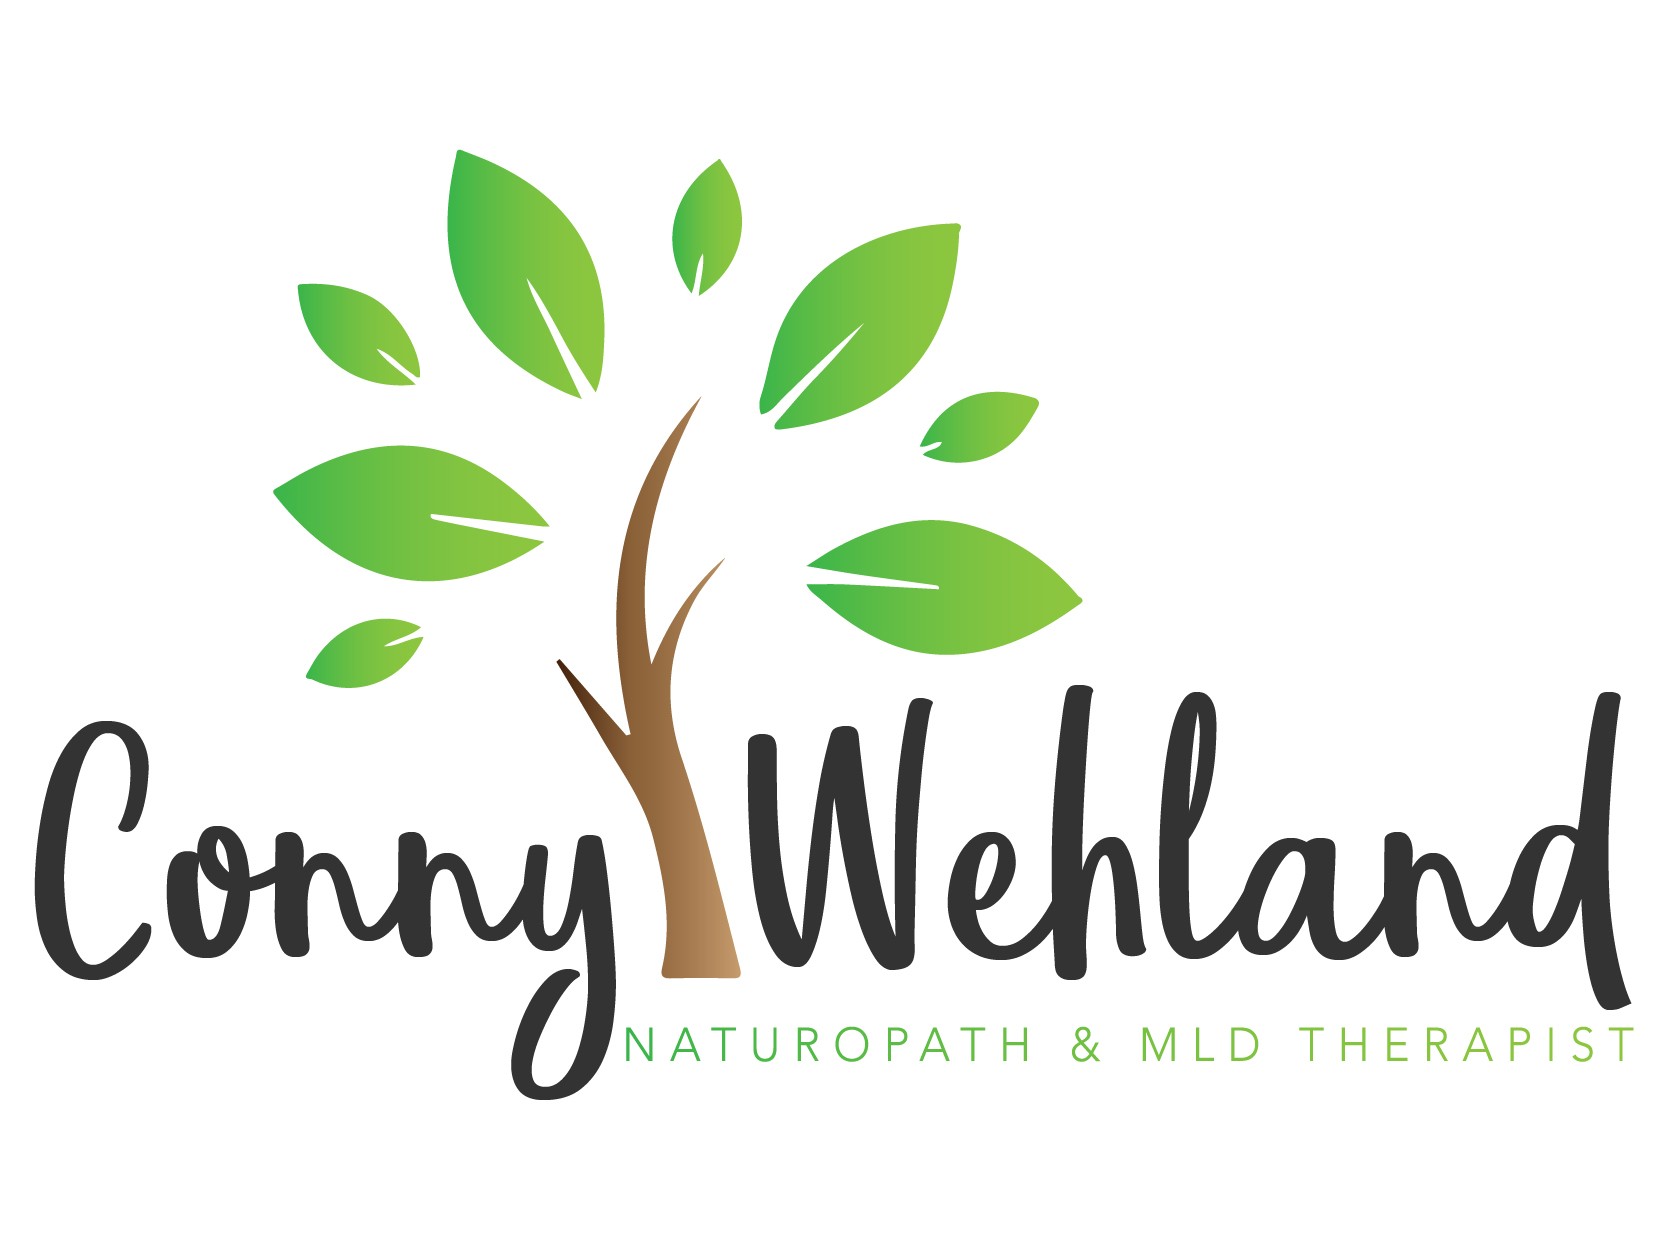 Conny Wehland therapist on Natural Therapy Pages